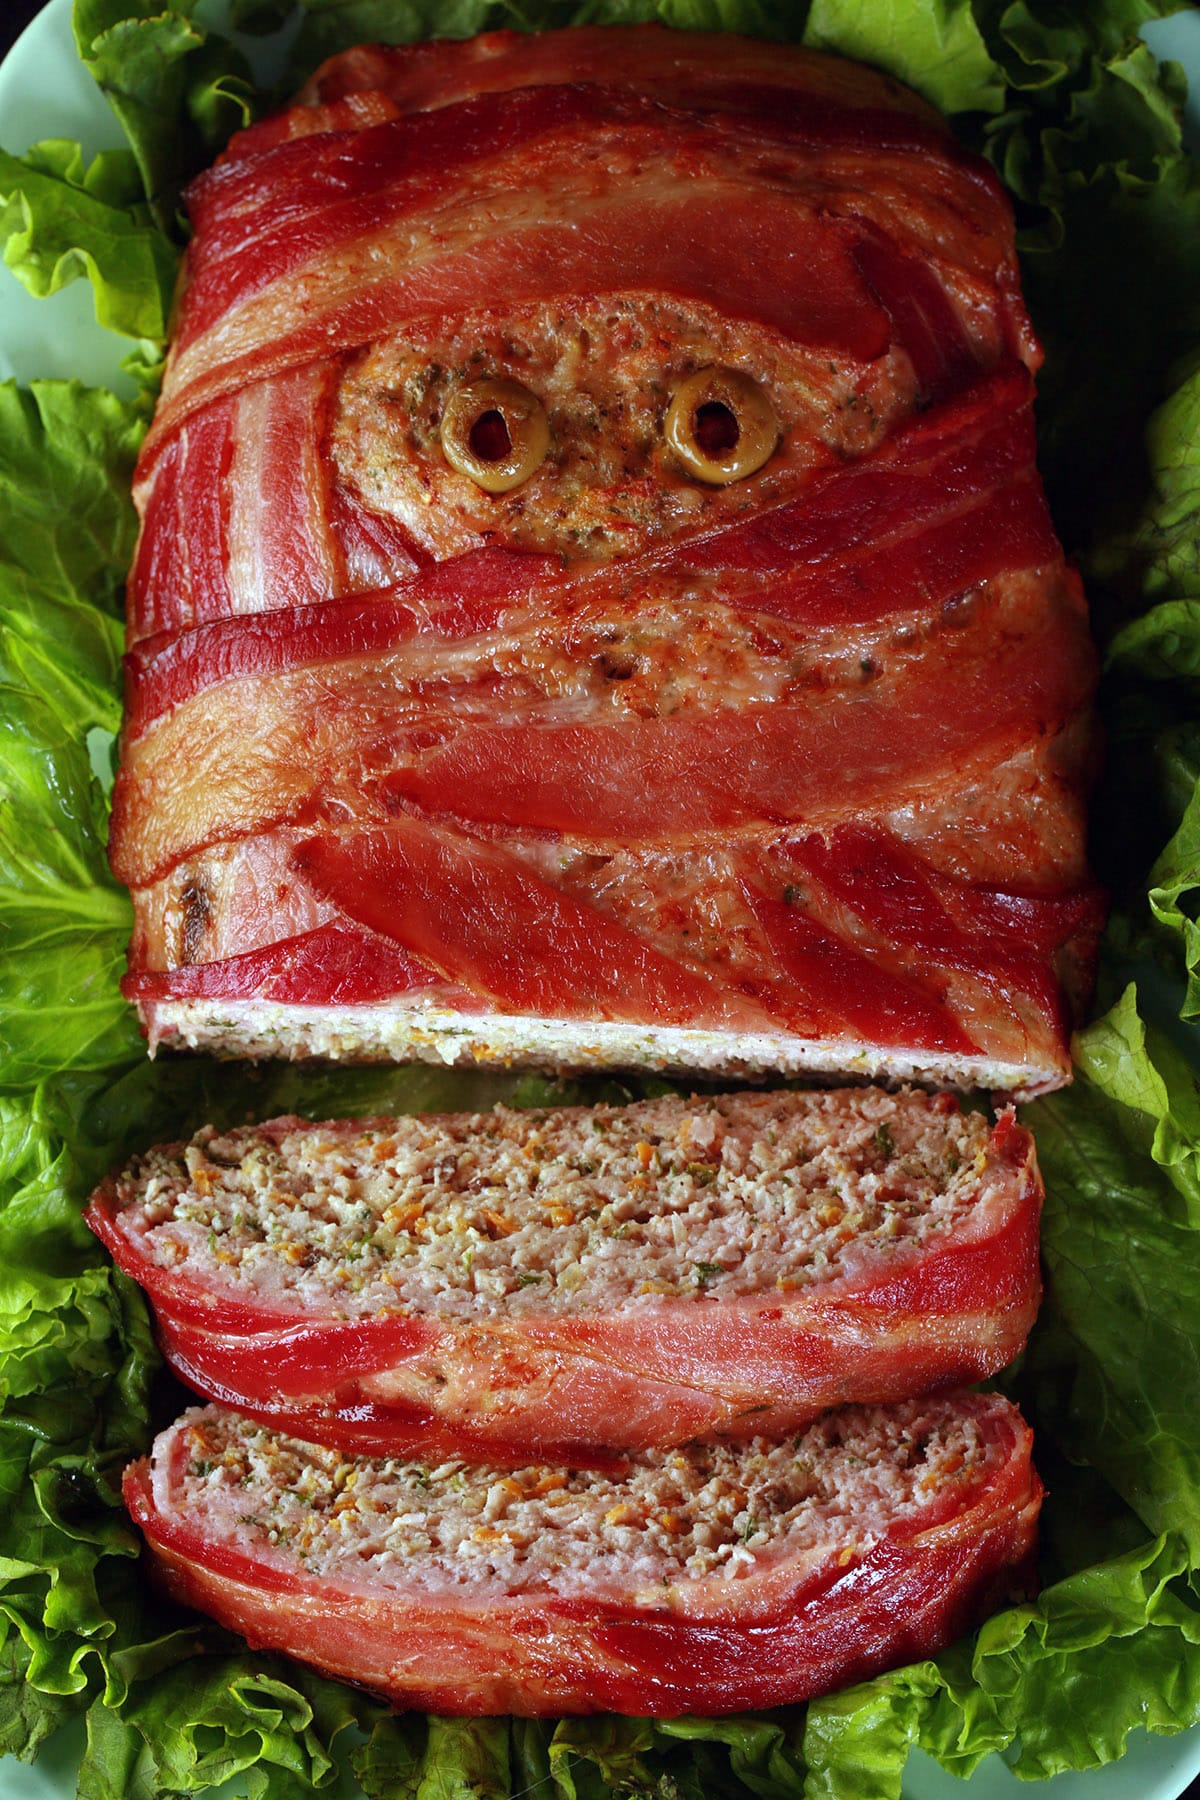 A halloween meatloaf, wrapped in bacon to look like a mummy. It has olive eyes.